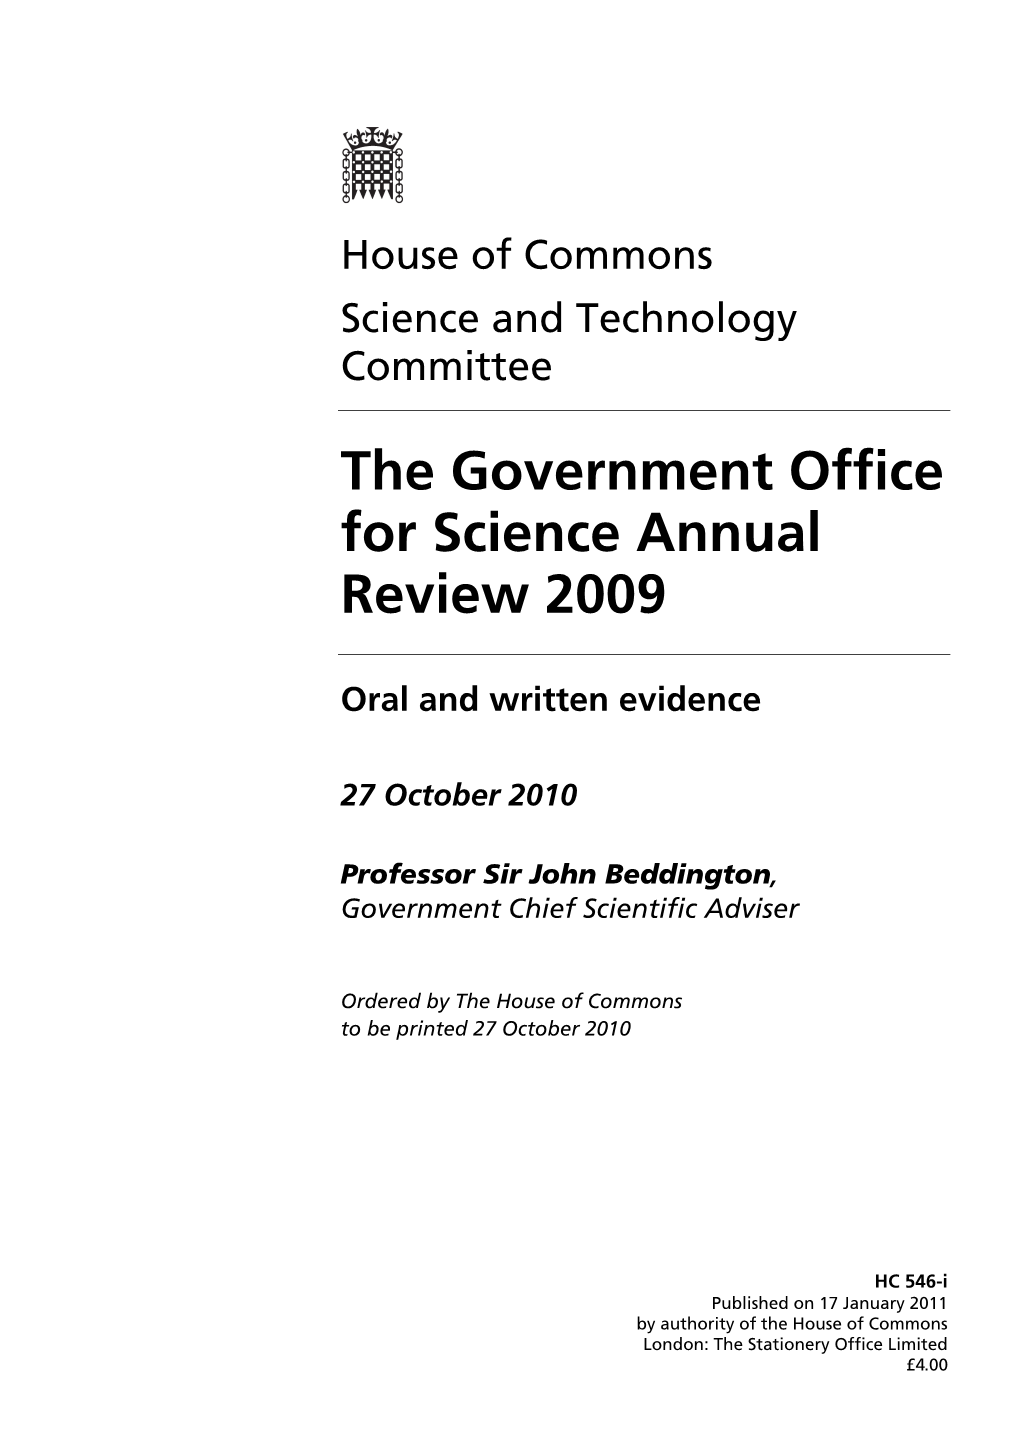 The Government Office for Science Annual Review 2009